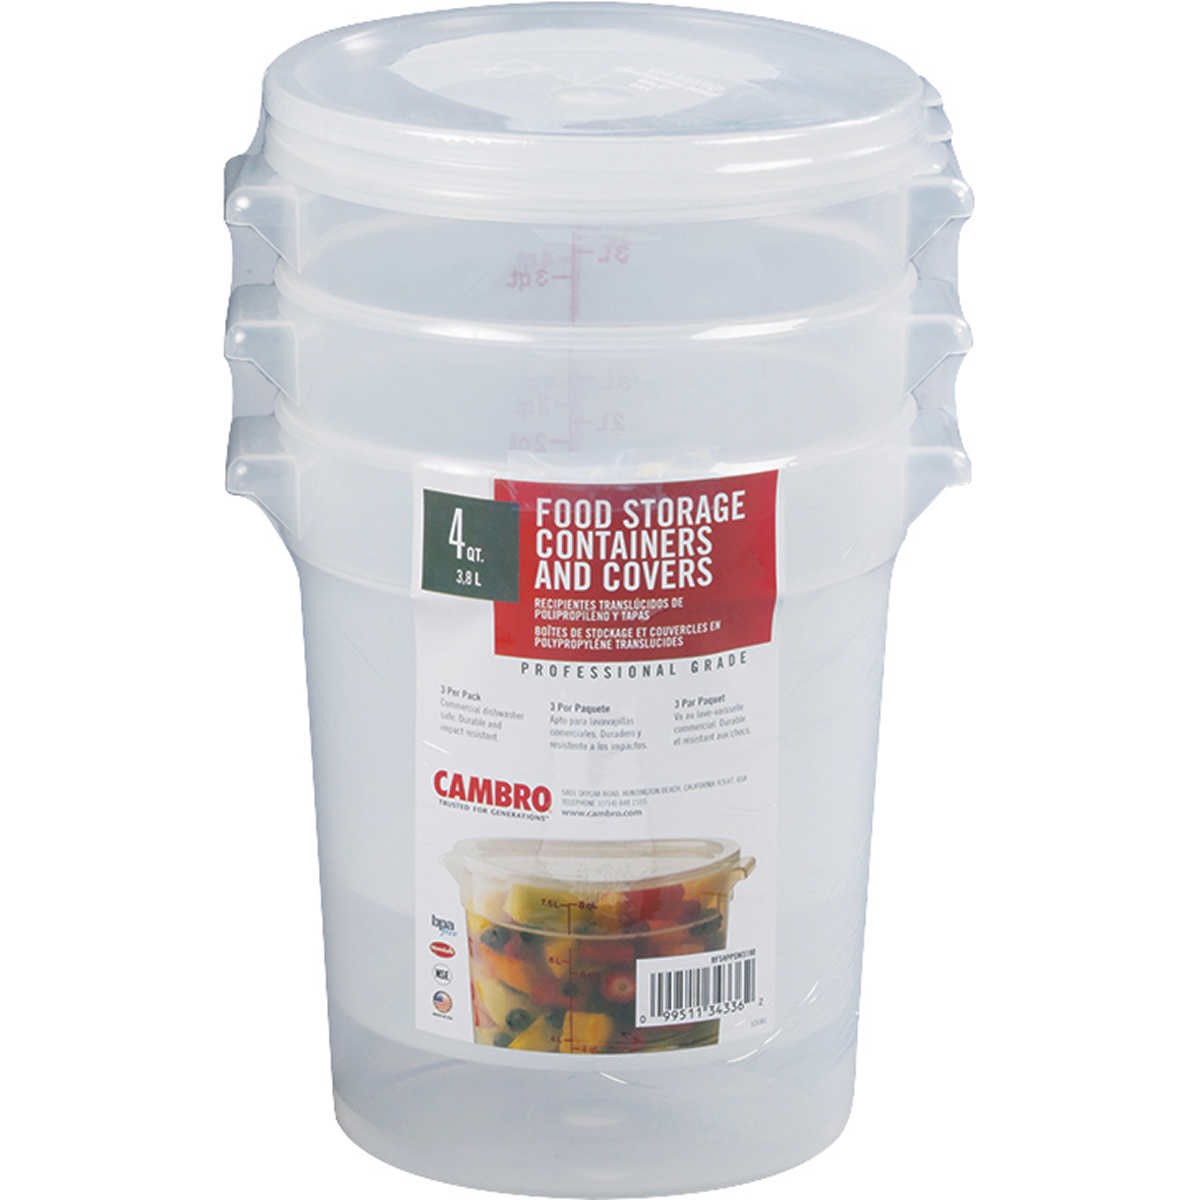 Cambro 4 Quart Camsquare Food Storage Containers and Covers Set of 3 